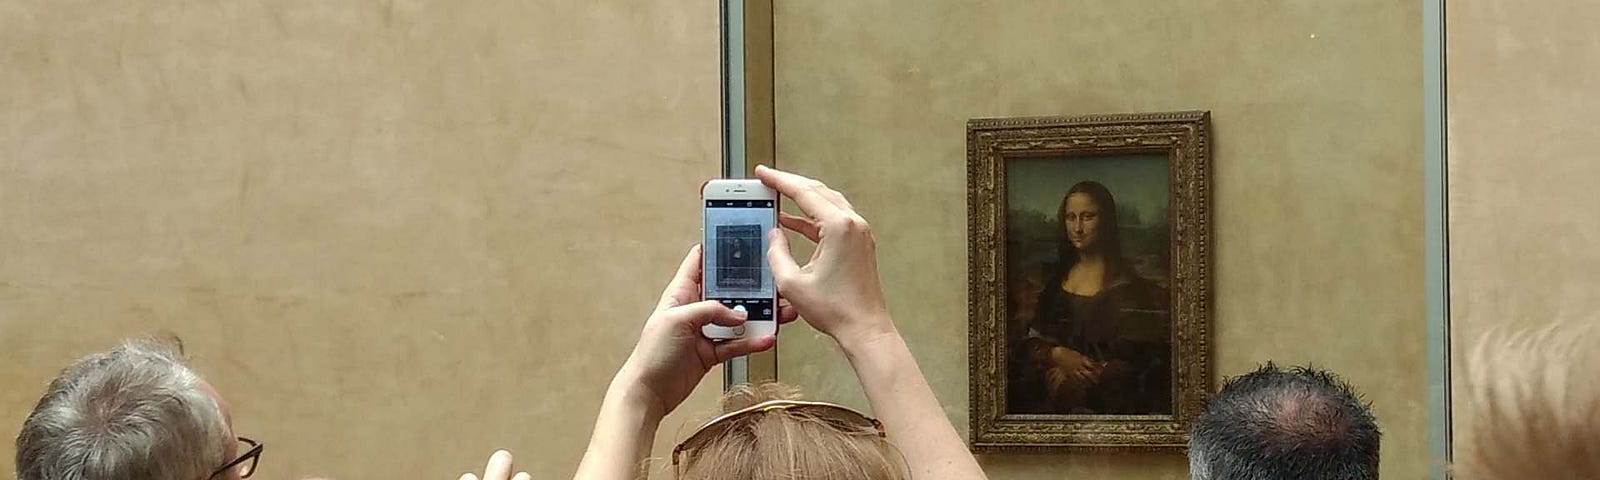 A group of tourists taking pictures of the Mona Lisa with their phones.